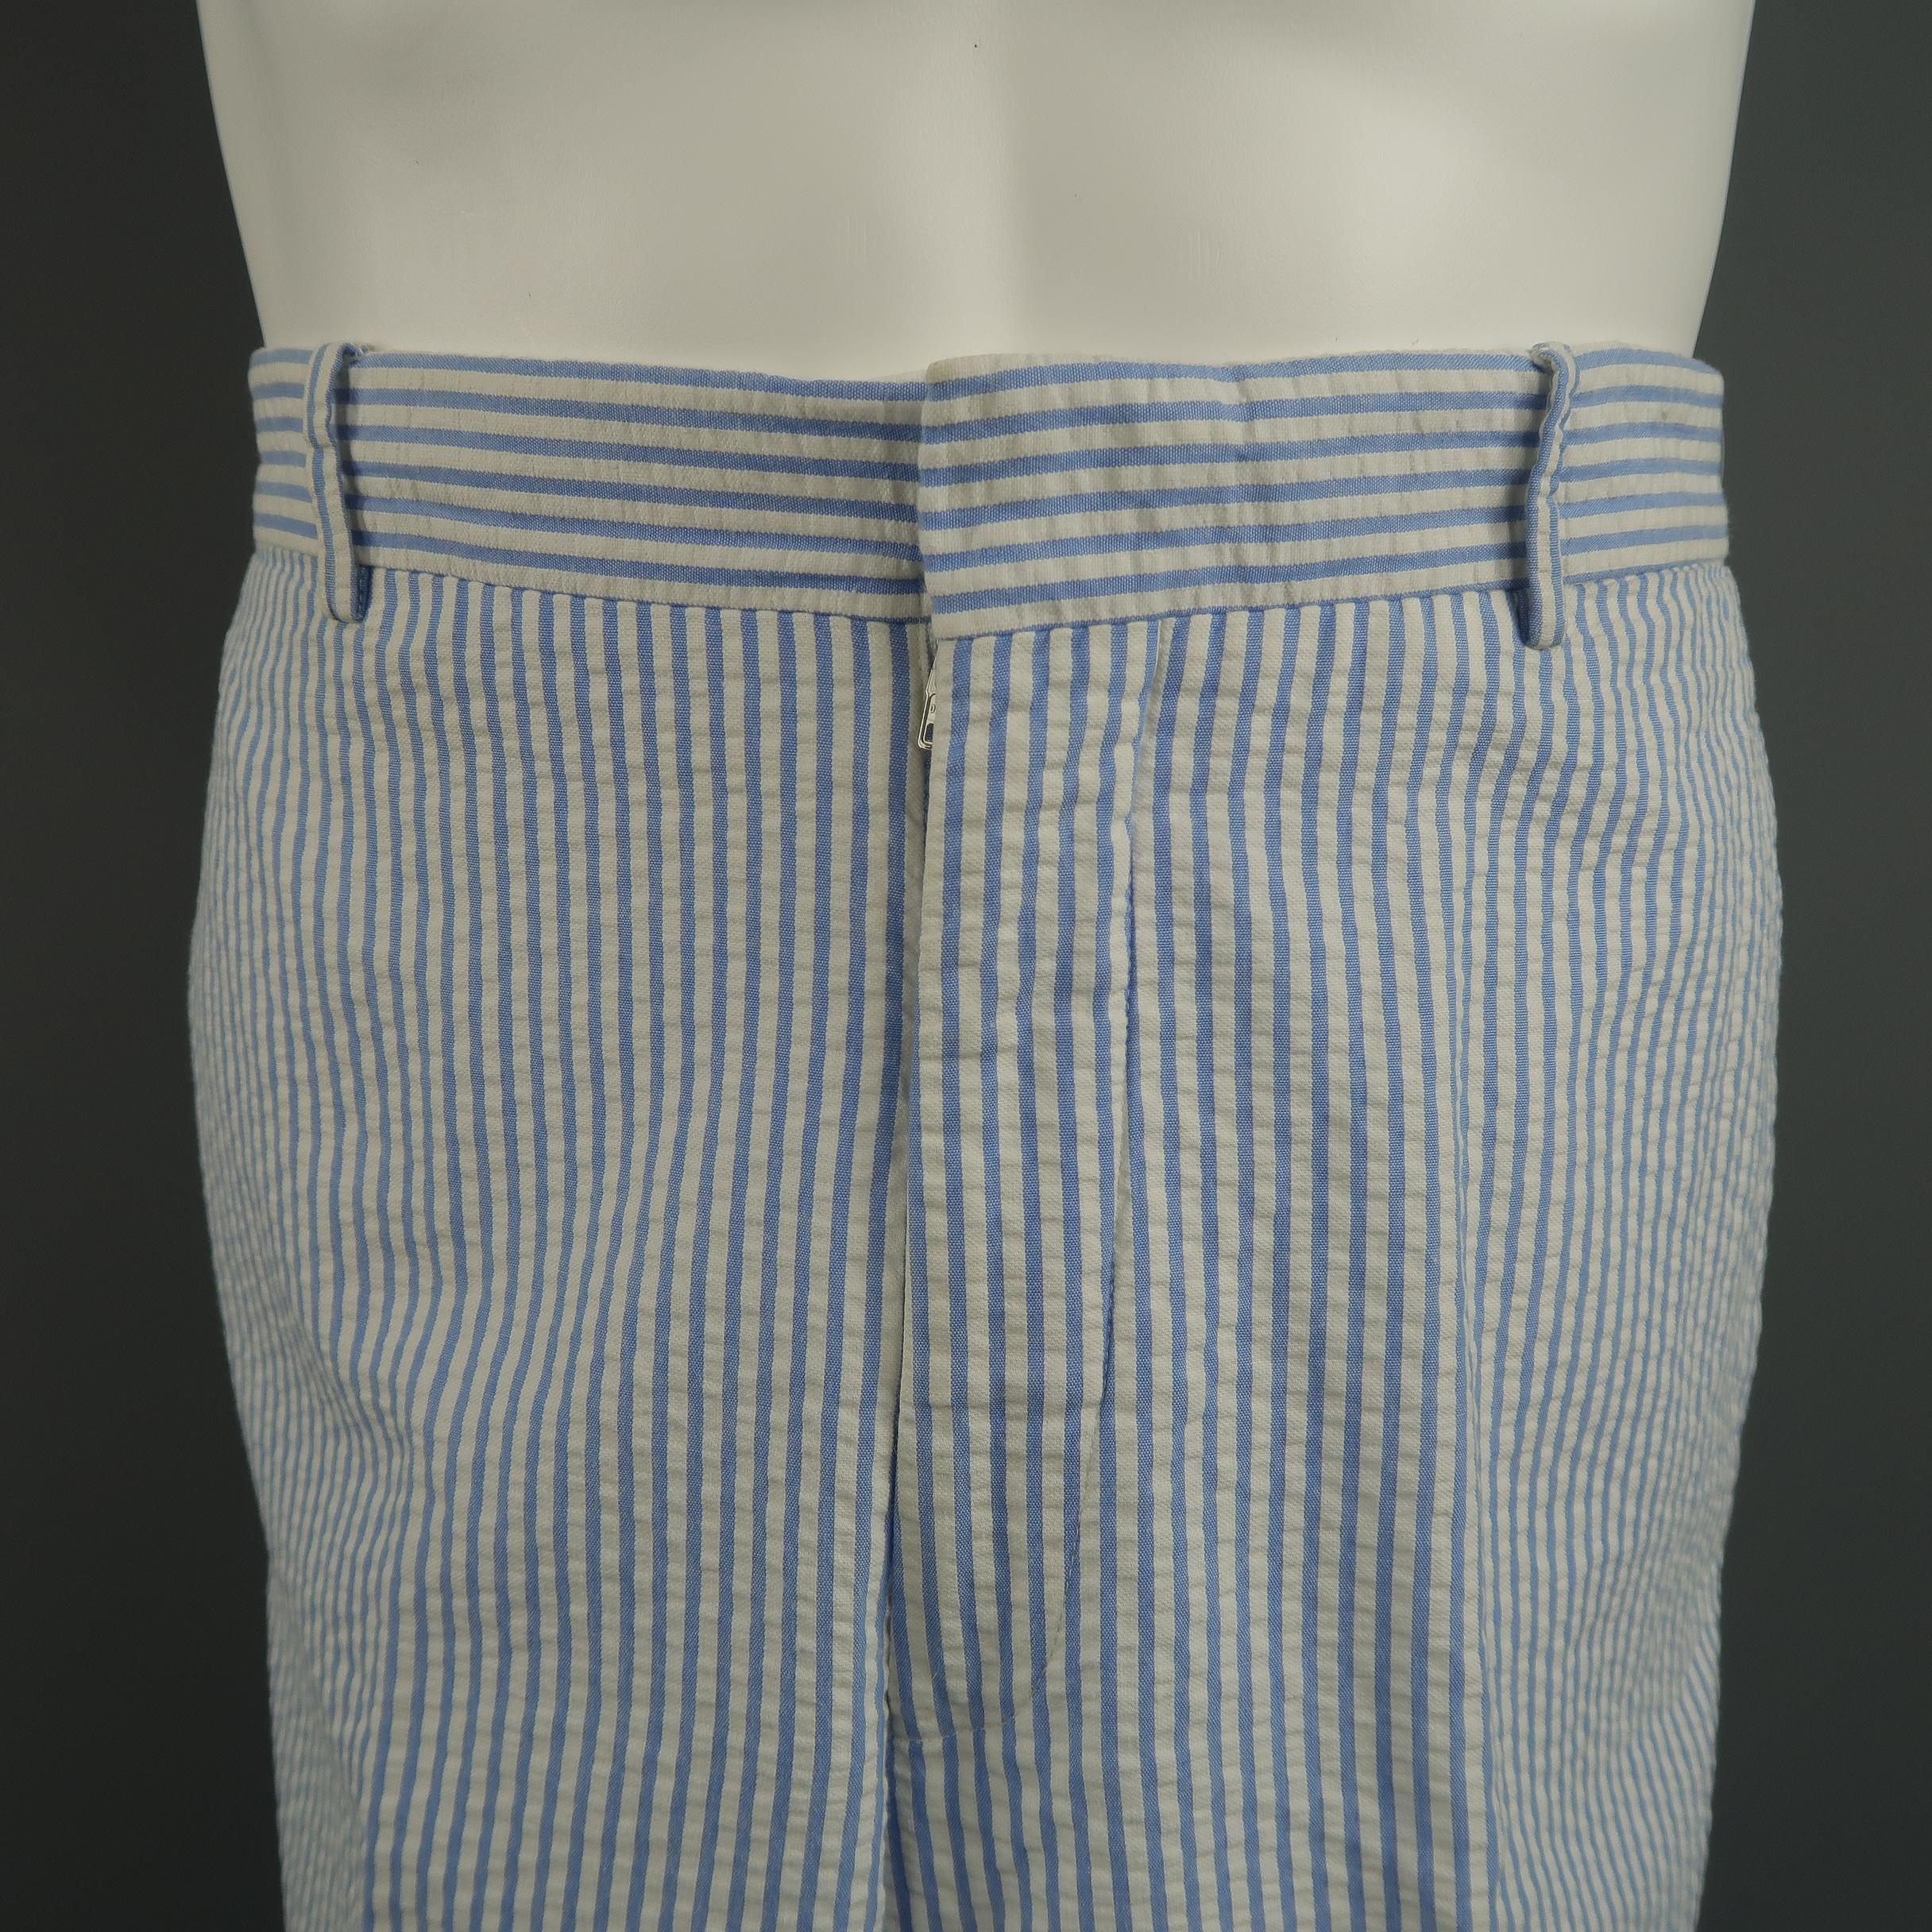 POLO by Ralph Lauren Classic casual pants, come in white and blue seersucker, with a classic tailoring closure and cuffed hem. Made in Italy.
 
Excellent Pre-Owned Condition.
Marked: (no size)
 
Measurements:
 
Waist: 31 in.
Rise: 11 in.
Inseam: 30